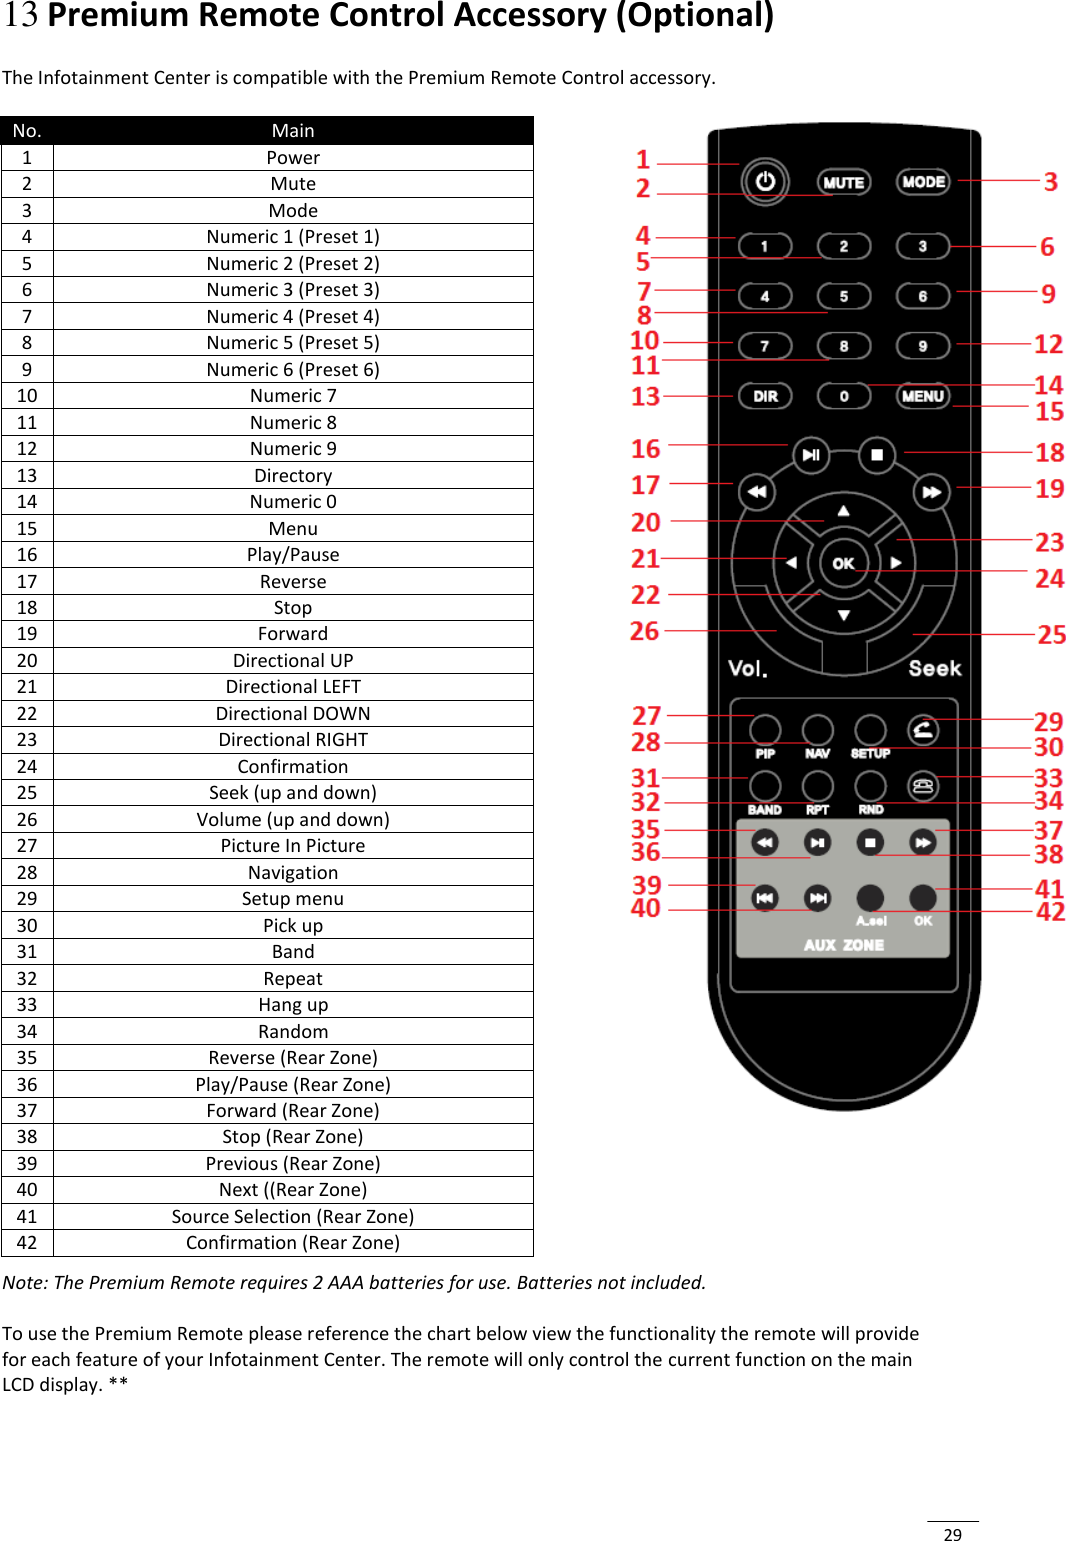  29 13 Premium Remote Control Accessory (Optional)  The Infotainment Center is compatible with the Premium Remote Control accessory.          Note: The Premium Remote requires 2 AAA batteries for use. Batteries not included.  To use the Premium Remote please reference the chart below view the functionality the remote will provide for each feature of your Infotainment Center. The remote will only control the current function on the main LCD display. **    No. Main 1 Power  2 Mute 3 Mode 4 Numeric 1 (Preset 1) 5 Numeric 2 (Preset 2) 6 Numeric 3 (Preset 3) 7 Numeric 4 (Preset 4) 8 Numeric 5 (Preset 5) 9 Numeric 6 (Preset 6) 10 Numeric 7  11 Numeric 8  12 Numeric 9  13 Directory 14 Numeric 0 15 Menu 16 Play/Pause 17 Reverse 18 Stop 19 Forward 20 Directional UP 21 Directional LEFT 22 Directional DOWN 23 Directional RIGHT 24 Confirmation 25 Seek (up and down) 26 Volume (up and down) 27 Picture In Picture 28 Navigation 29 Setup menu 30 Pick up 31 Band 32 Repeat 33 Hang up 34 Random 35 Reverse (Rear Zone) 36 Play/Pause (Rear Zone) 37 Forward (Rear Zone) 38 Stop (Rear Zone) 39 Previous (Rear Zone) 40 Next ((Rear Zone) 41 Source Selection (Rear Zone) 42 Confirmation (Rear Zone) 